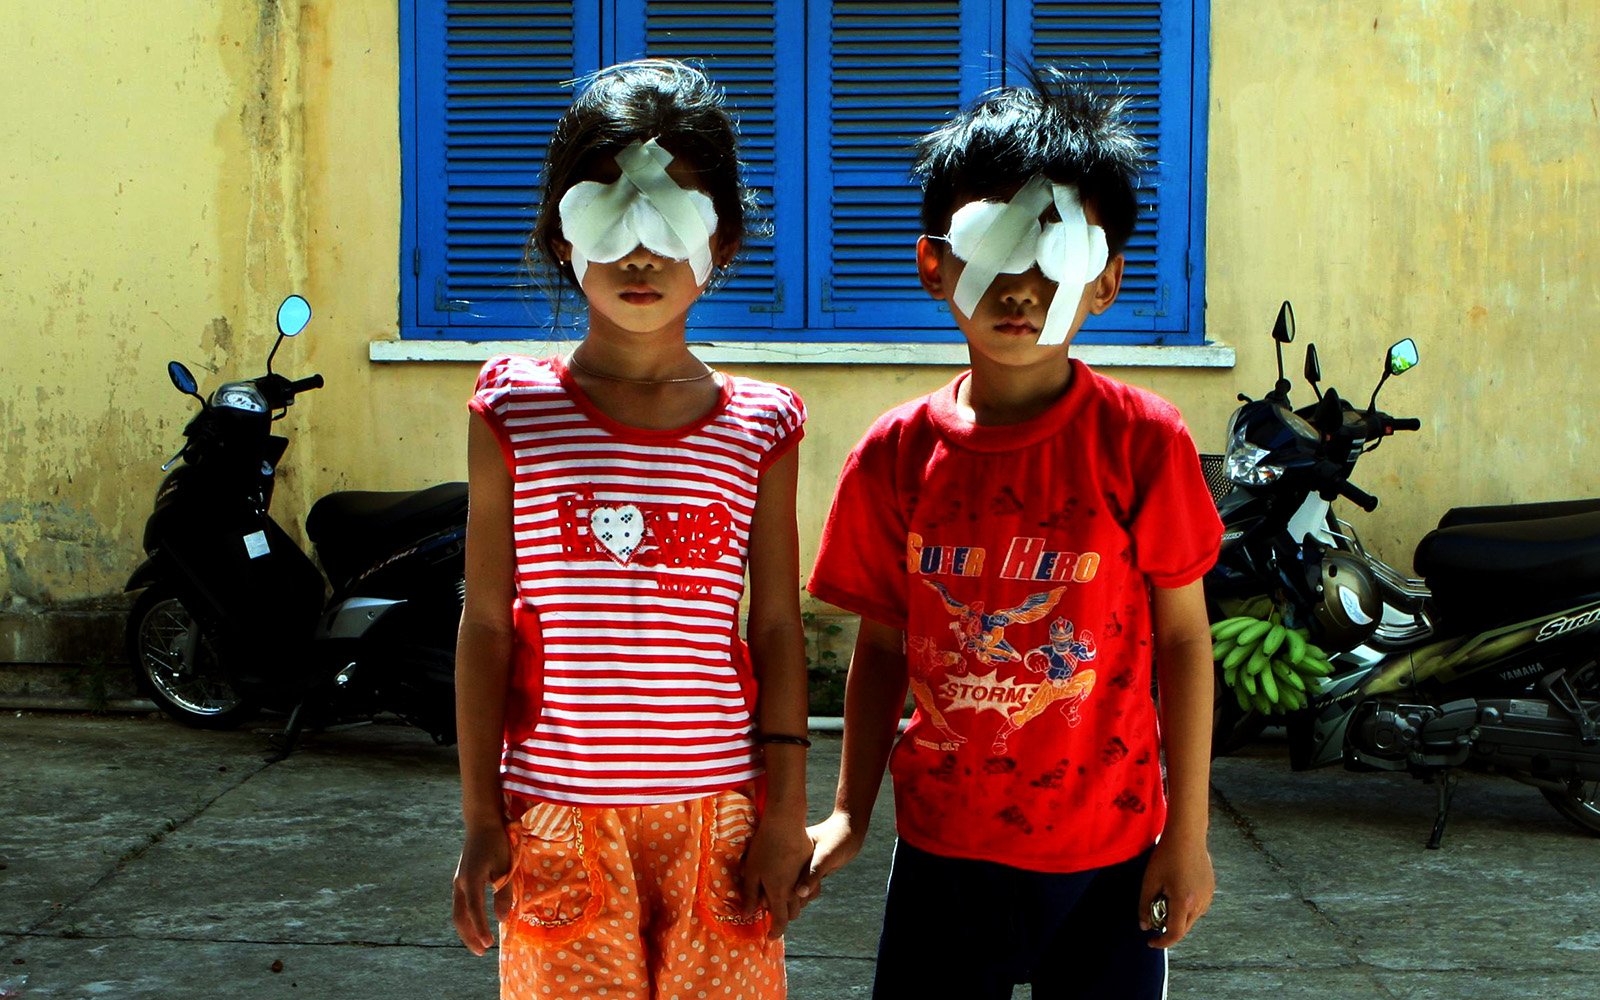 Children recovering from eye surgery